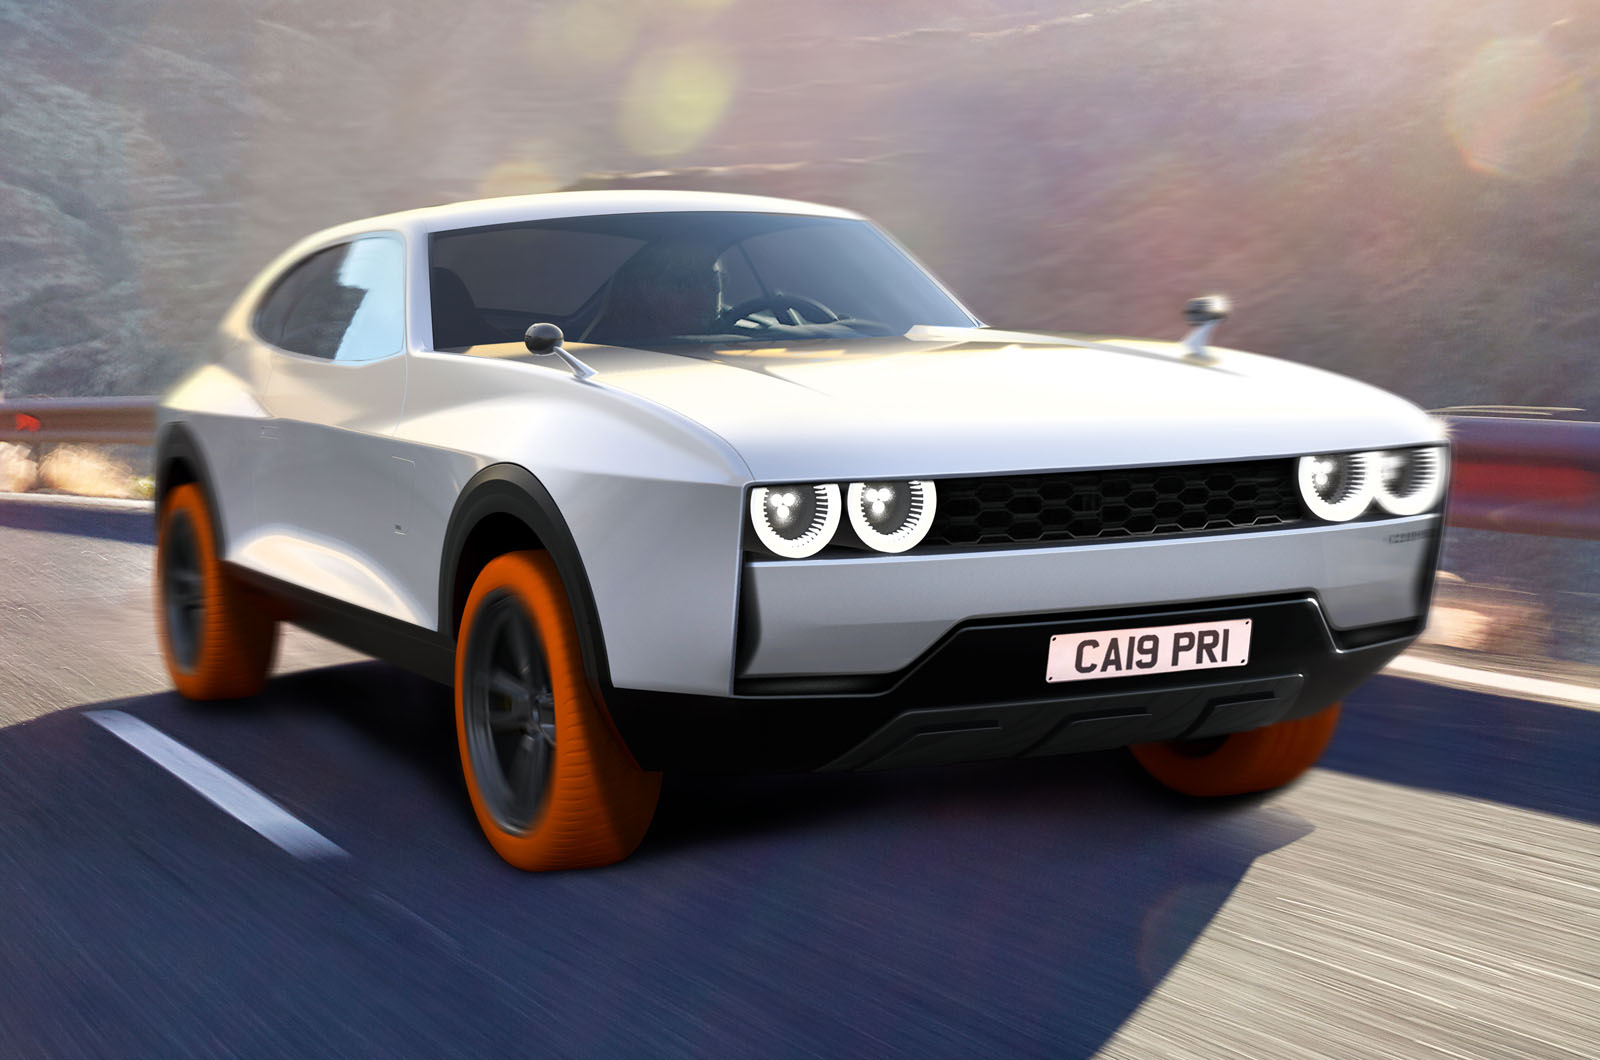 Ford Capri 2021 Release Date and Concept